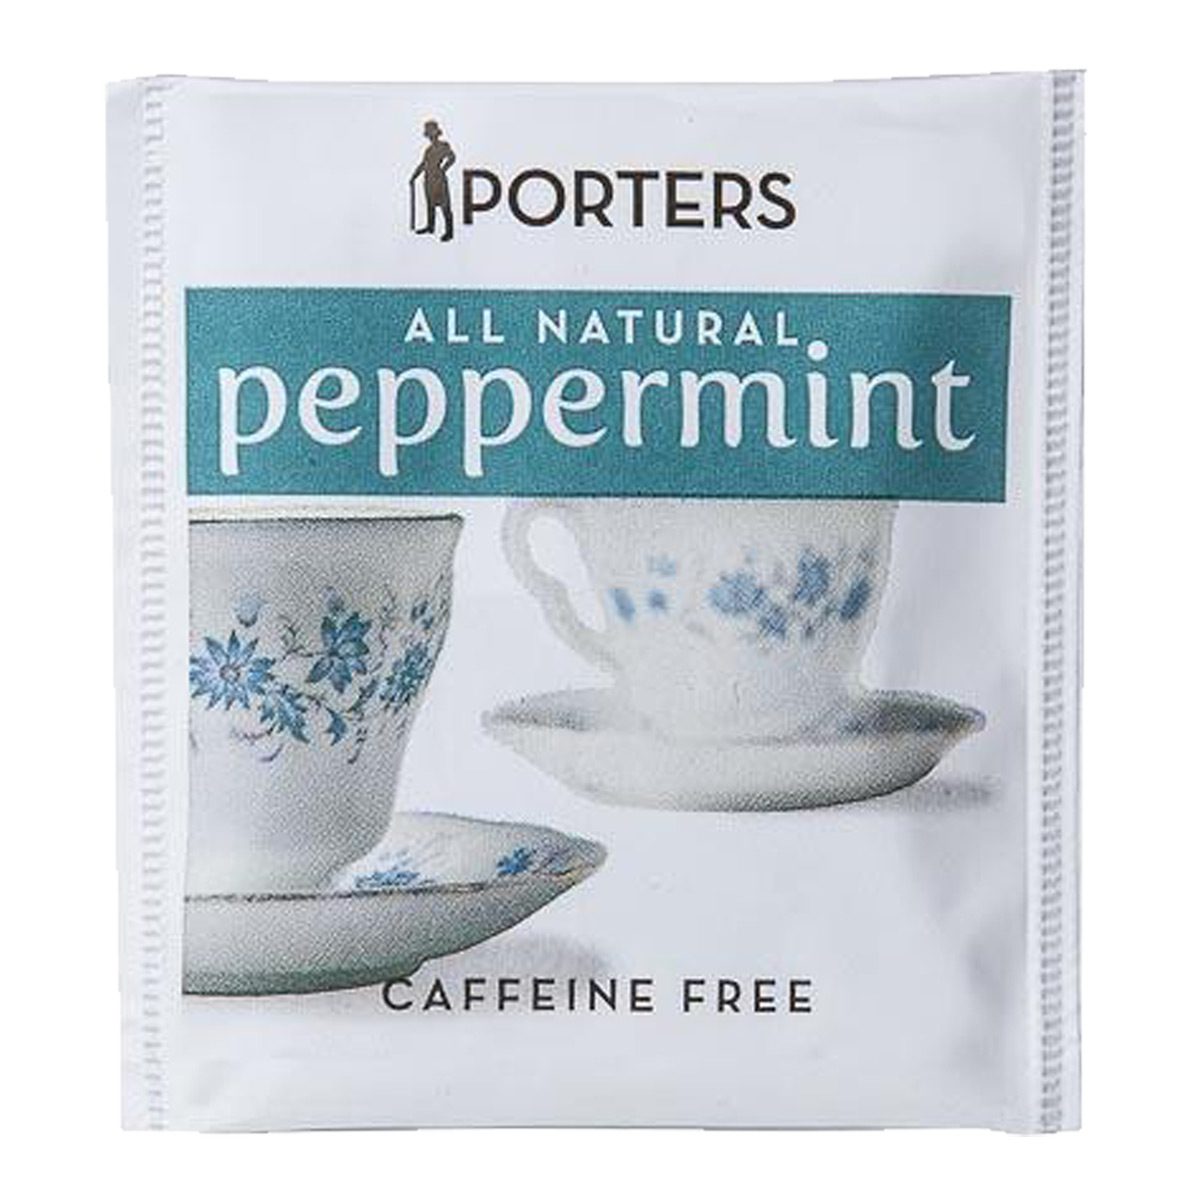 consumables-hospitality-beverage-food-porter-peppermint-teabags-x100-bags-natural-caffeine-free-tea-relaxing-palate-cleanser-aids-digestion-packaging-plastic-foil-free-vjs-distributors-HPHERBP